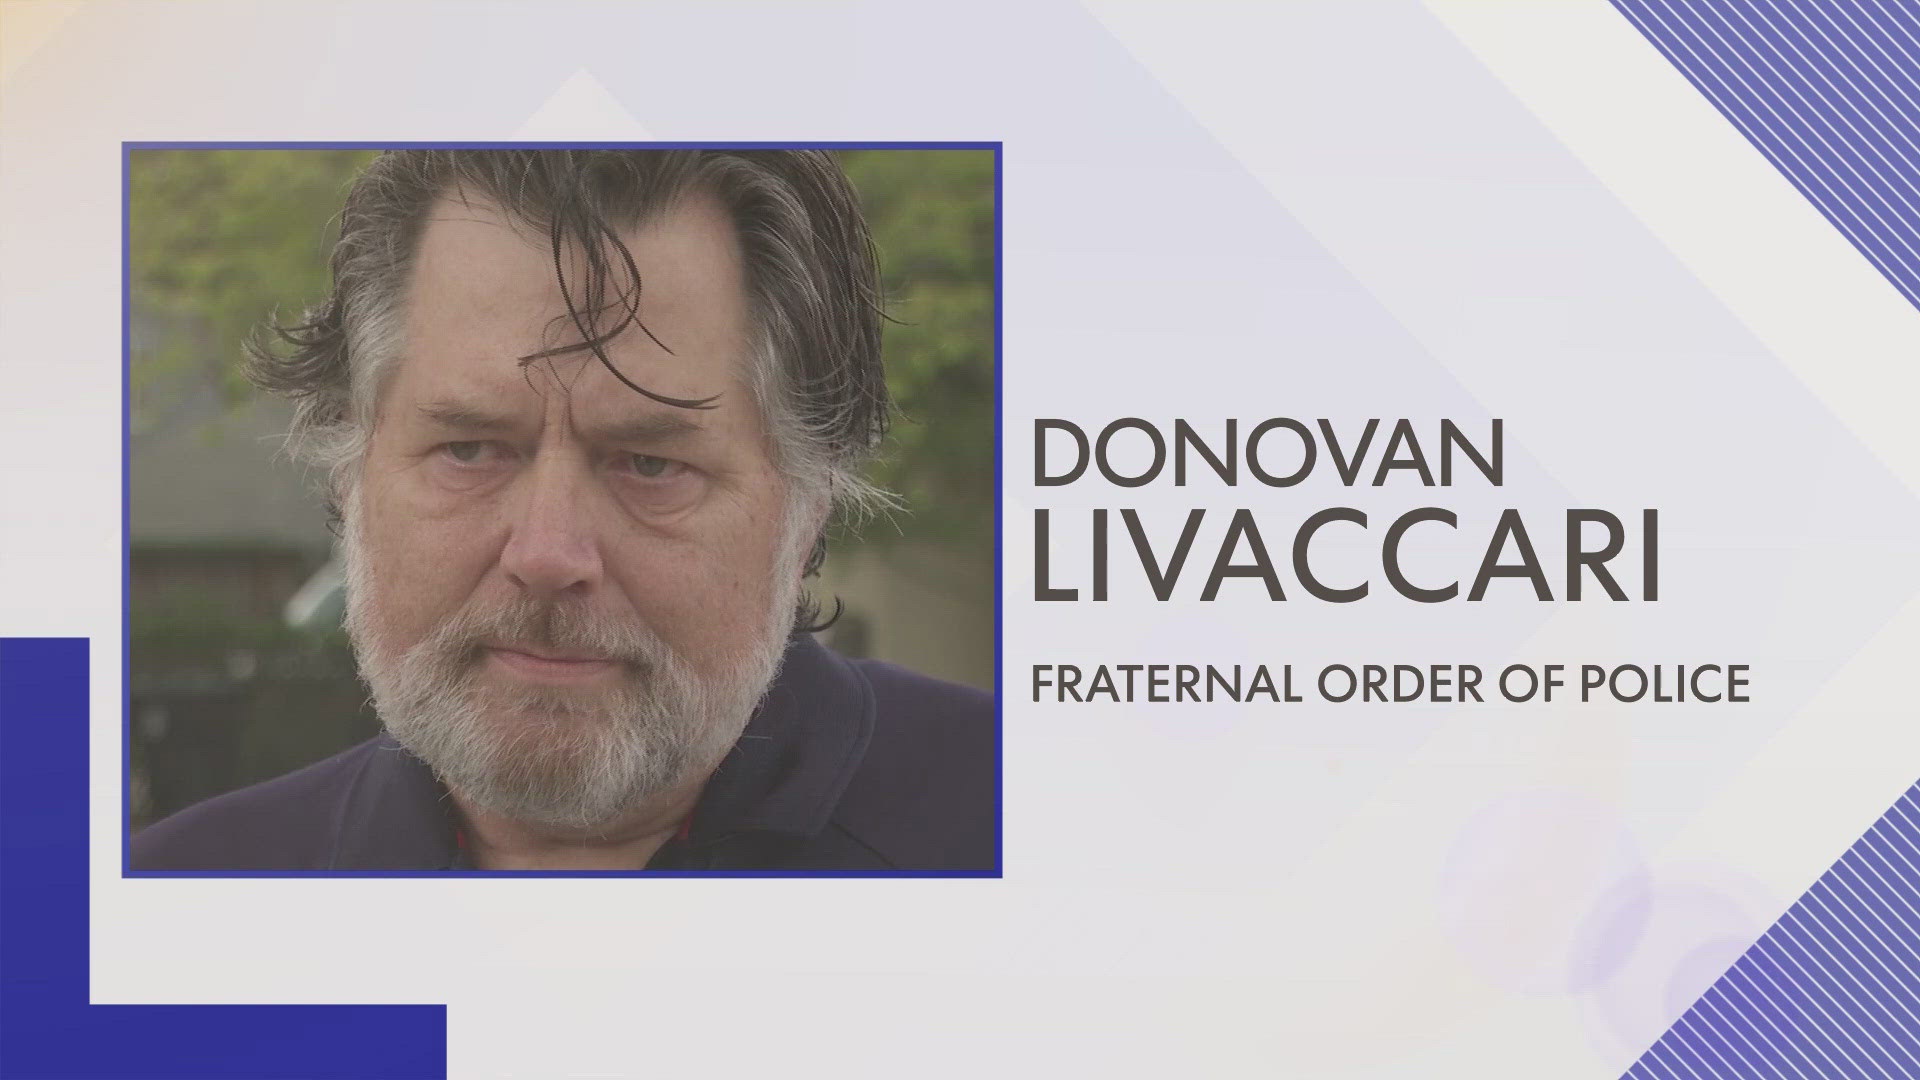 Livaccari was a retired NOPD police sergeant and also served as the general counsel for the state lodge.